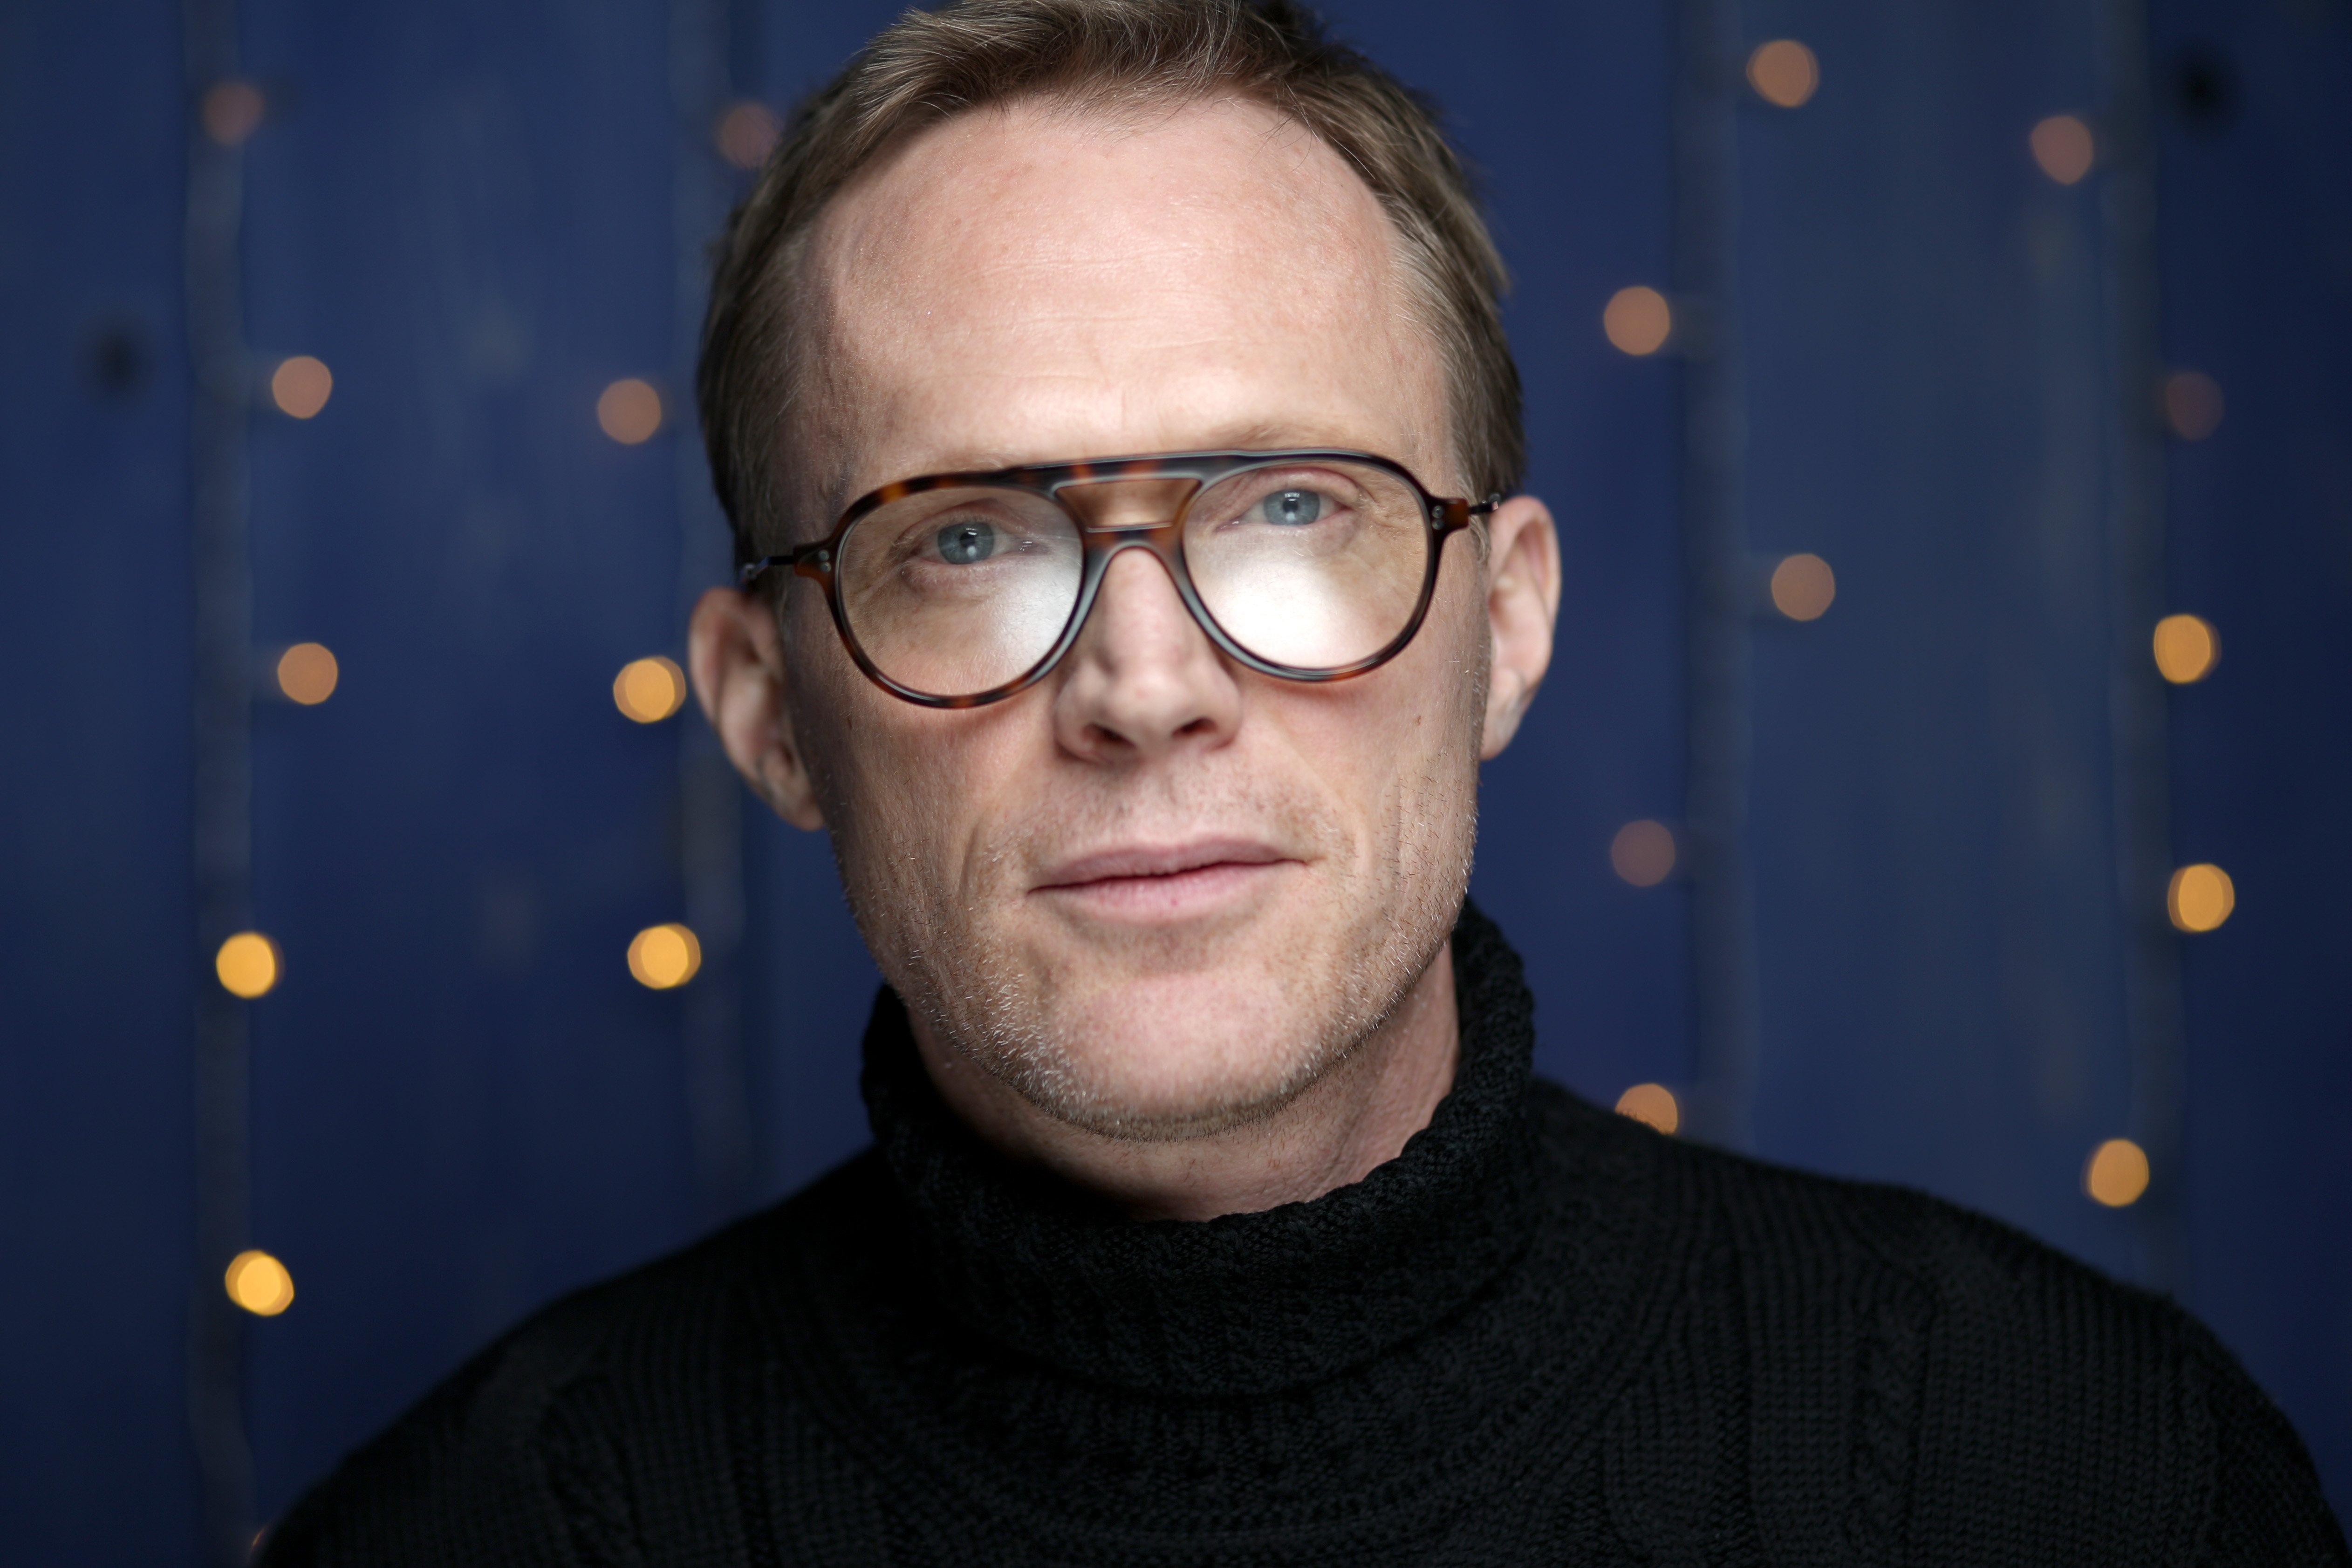 headshot of Paul Bettany wearing glasses and a black shirt